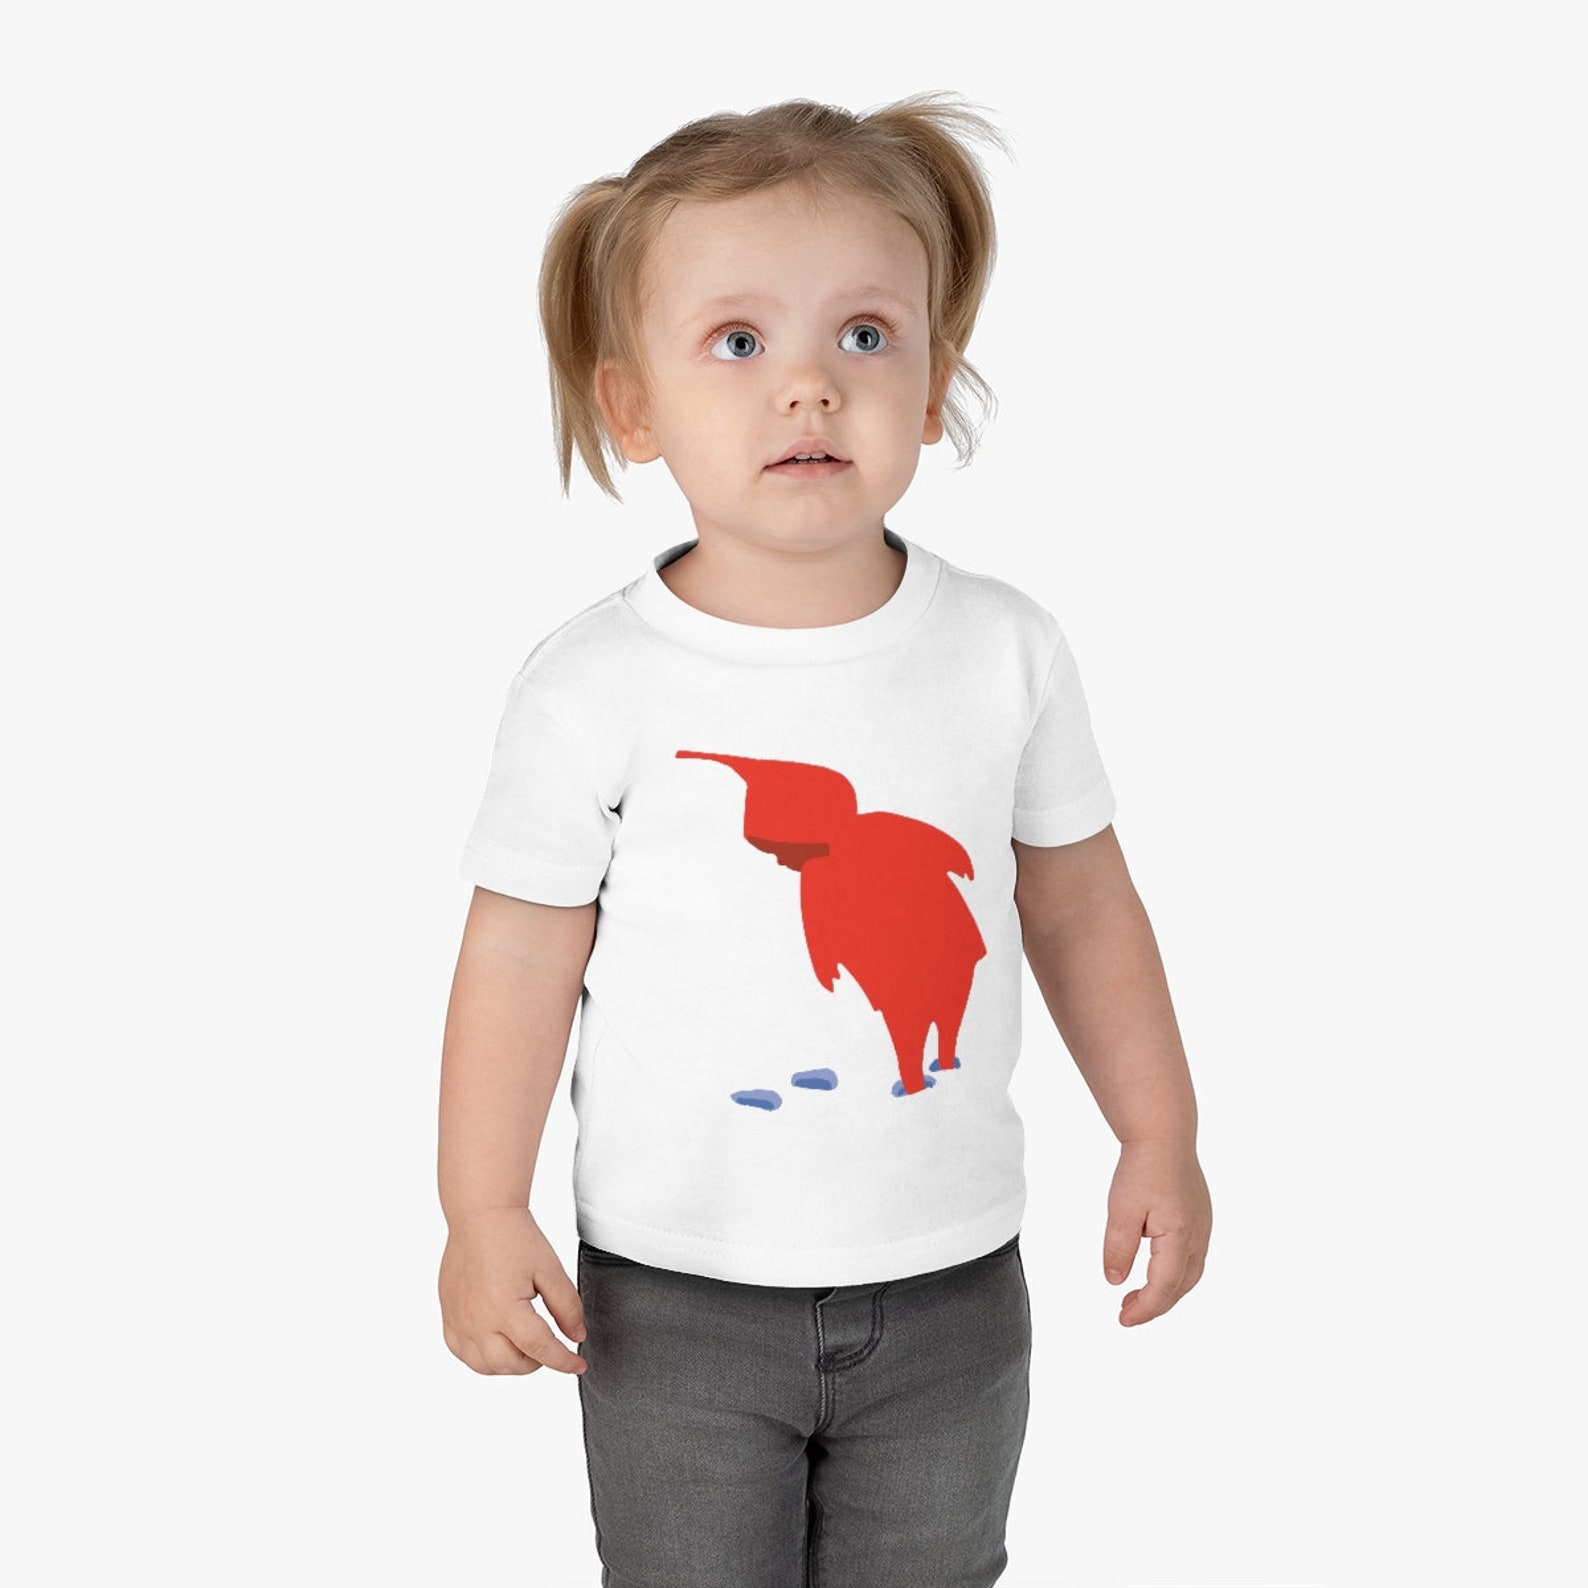 Snowy Day Infant Cotton Jersey Tee